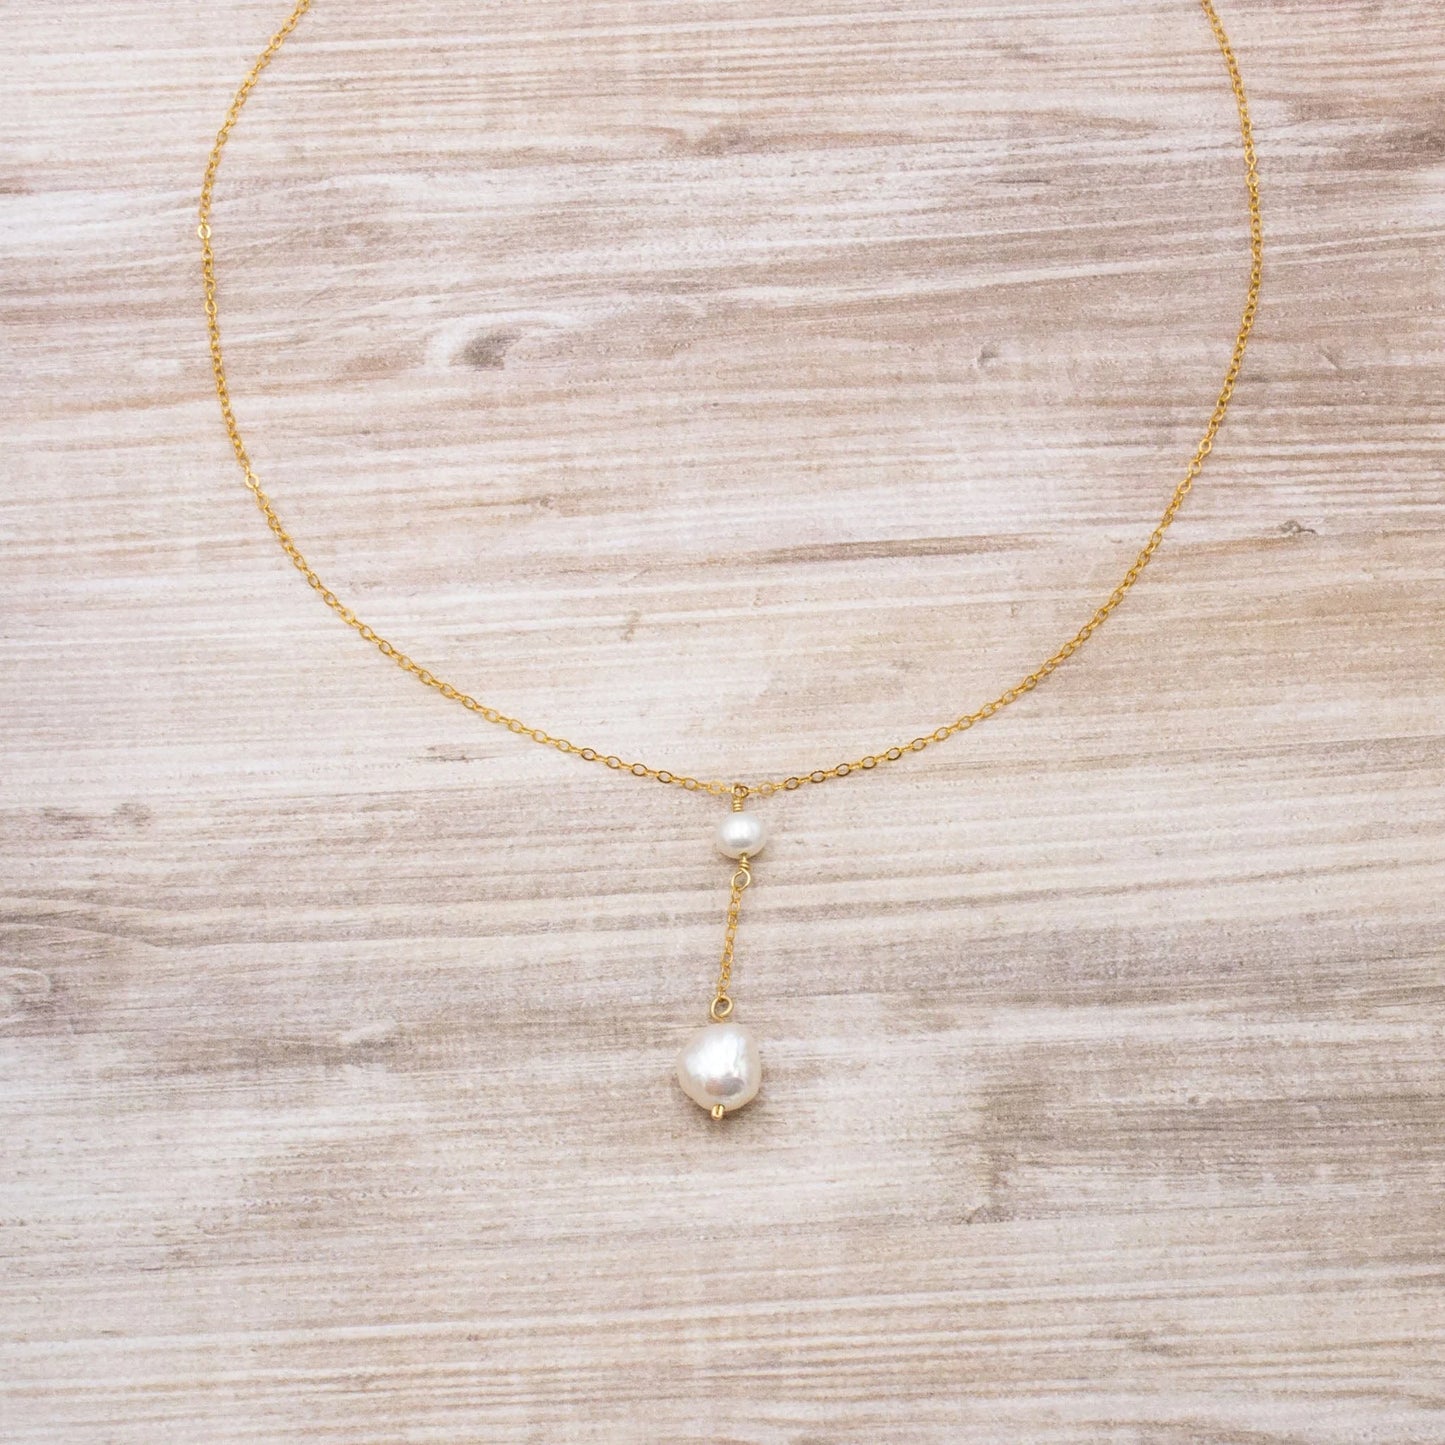 Arbor Trading Post Necklaces Handcrafted Freshwater White Pearl Dainty Gold Lariat Necklace